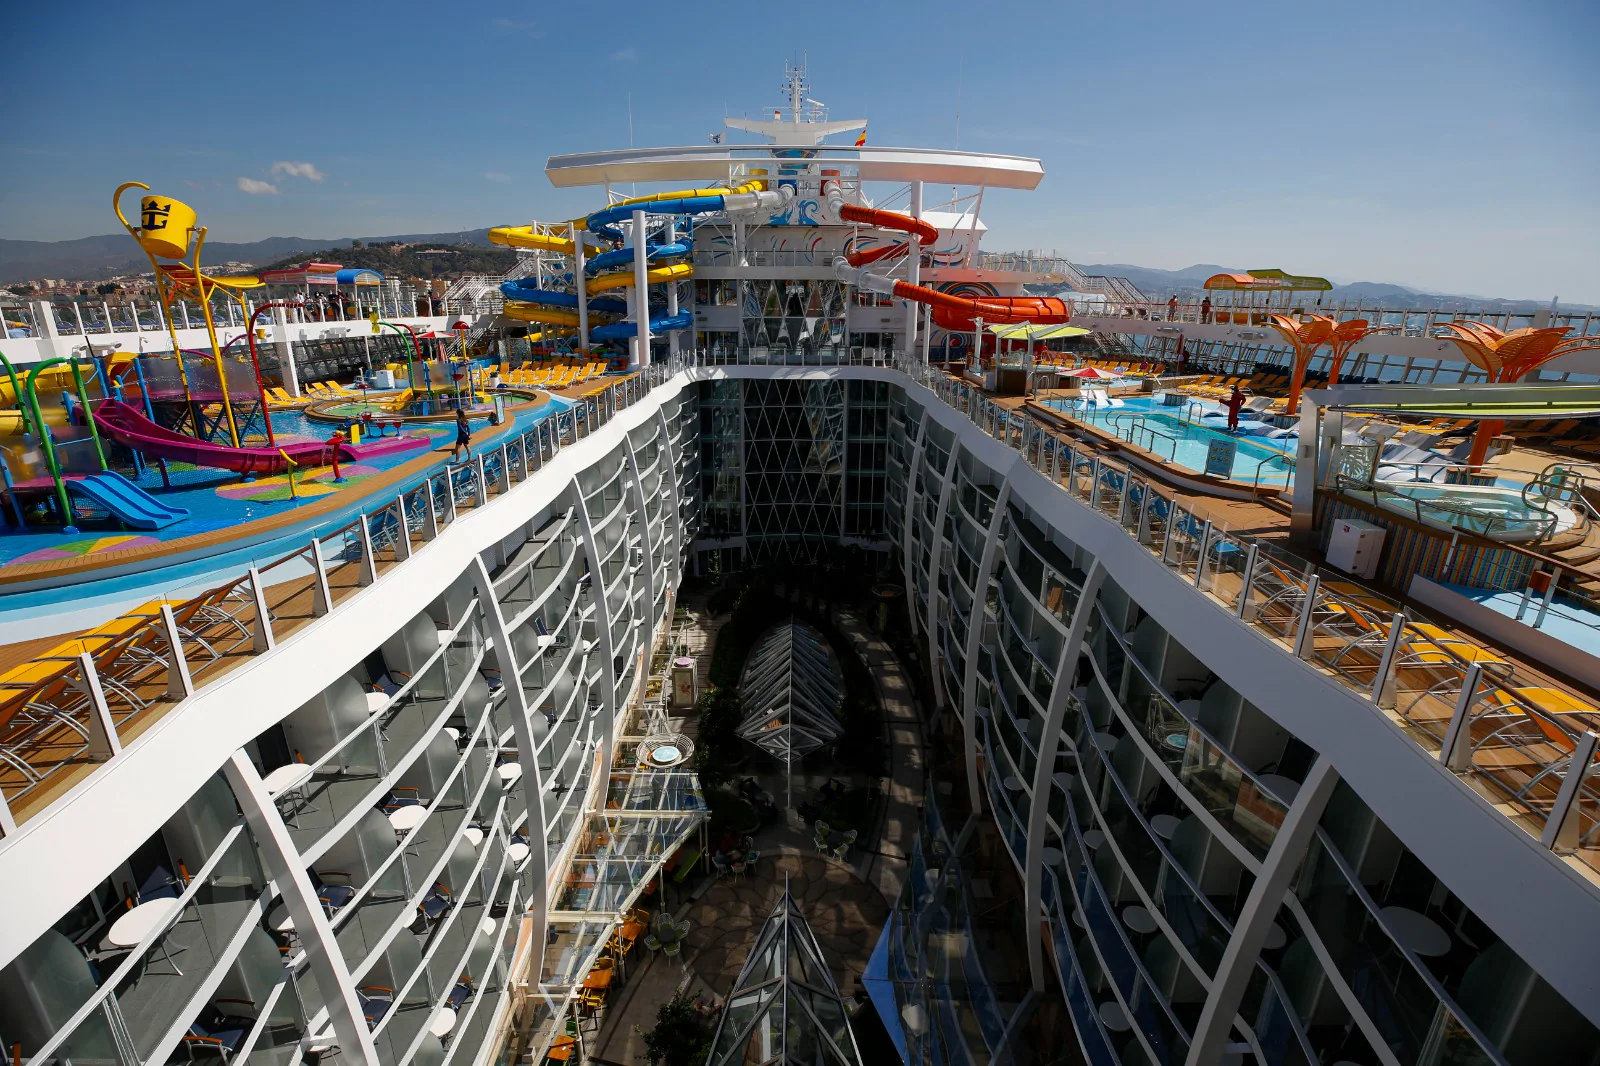 The Wonder of the Seas docks in Malaga, its first port of call in Spain.